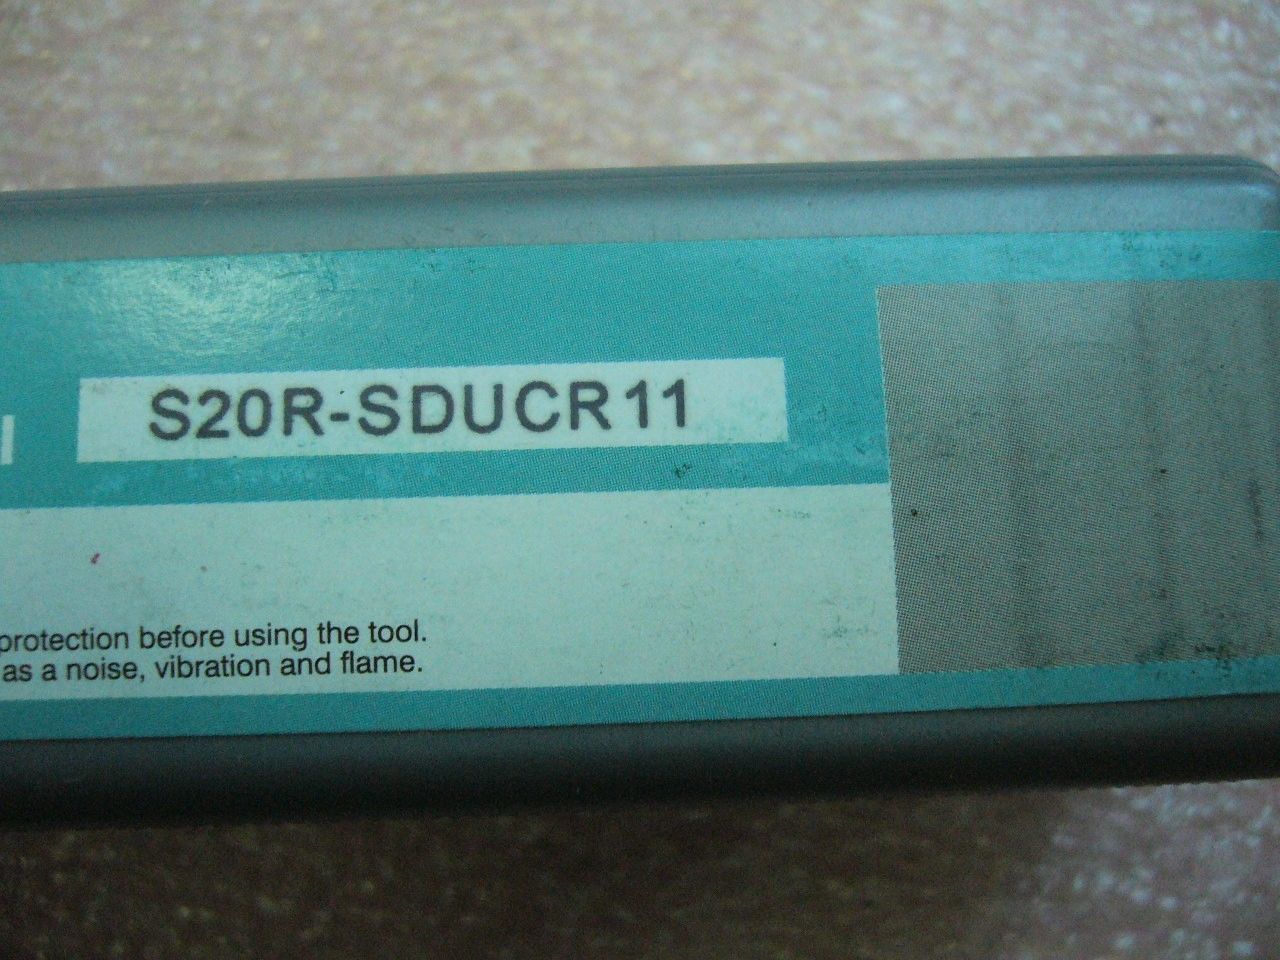 Boring Toolholder S20R-SDUCR11 for inserts DCMT11T3.. DCMT32.5..